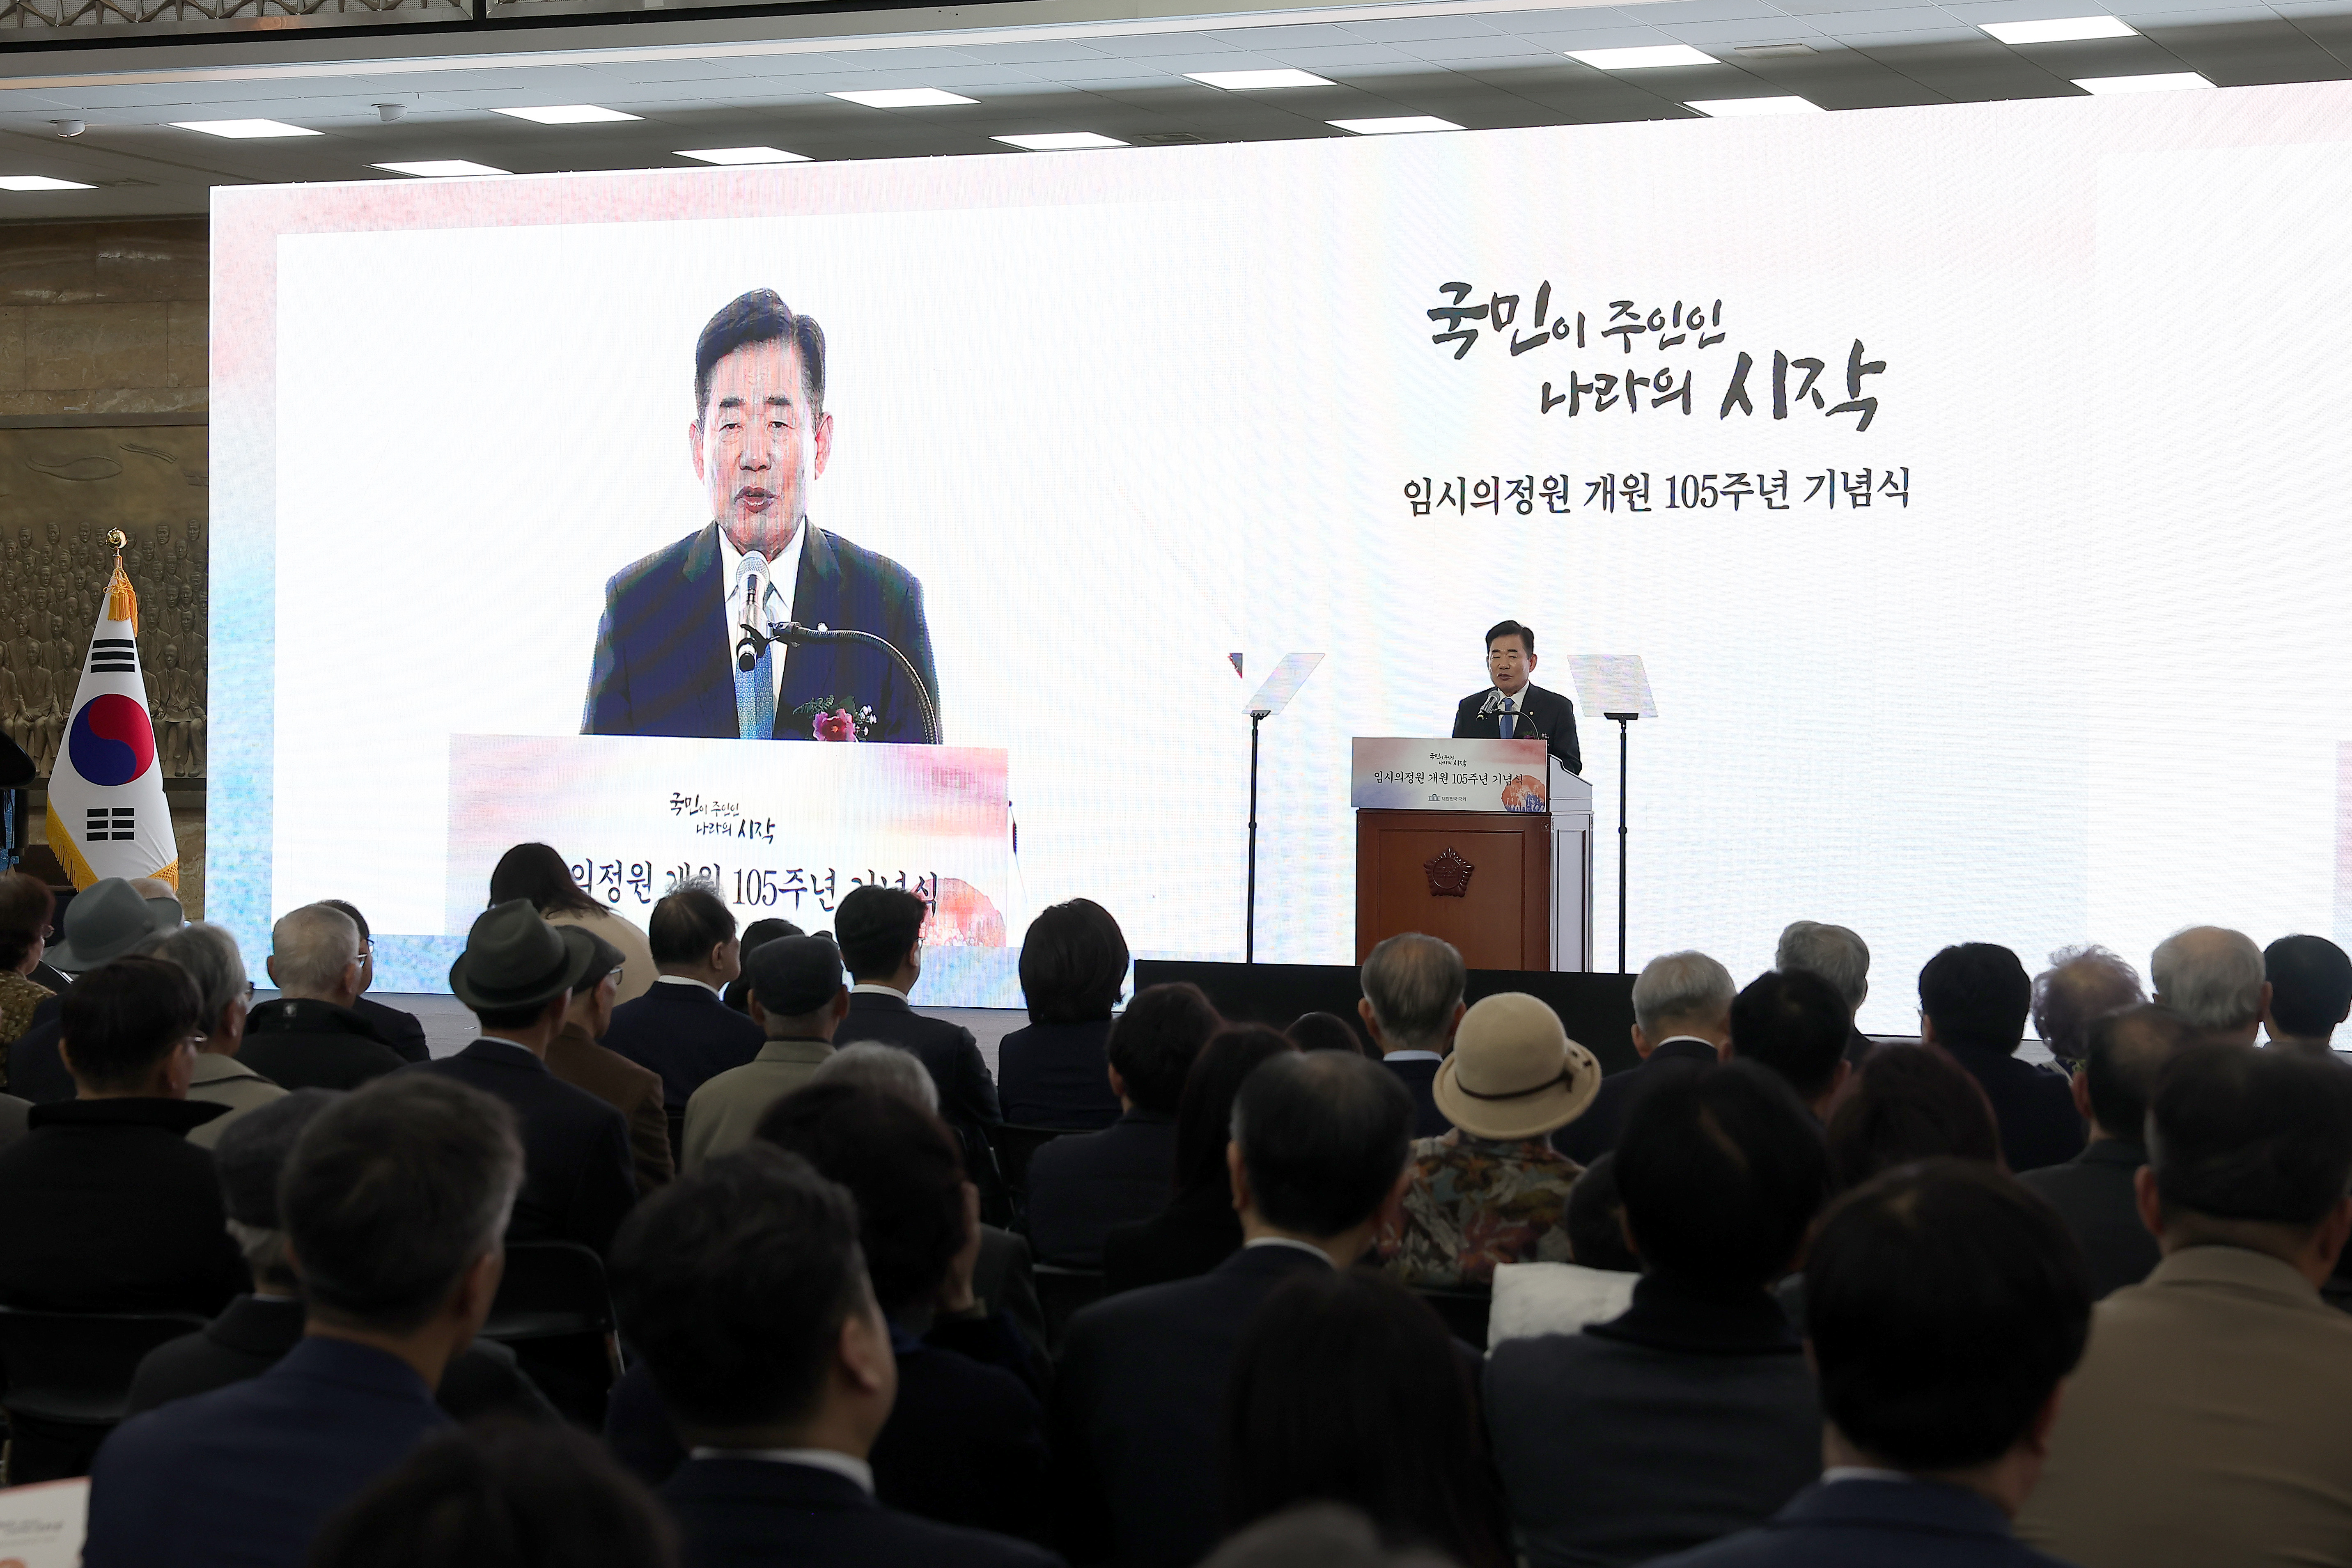 Speaker urges &ldquo;national unity&rdquo; at 105th anniv. of the Provisional Legislative Assembly opening 관련사진 3 보기